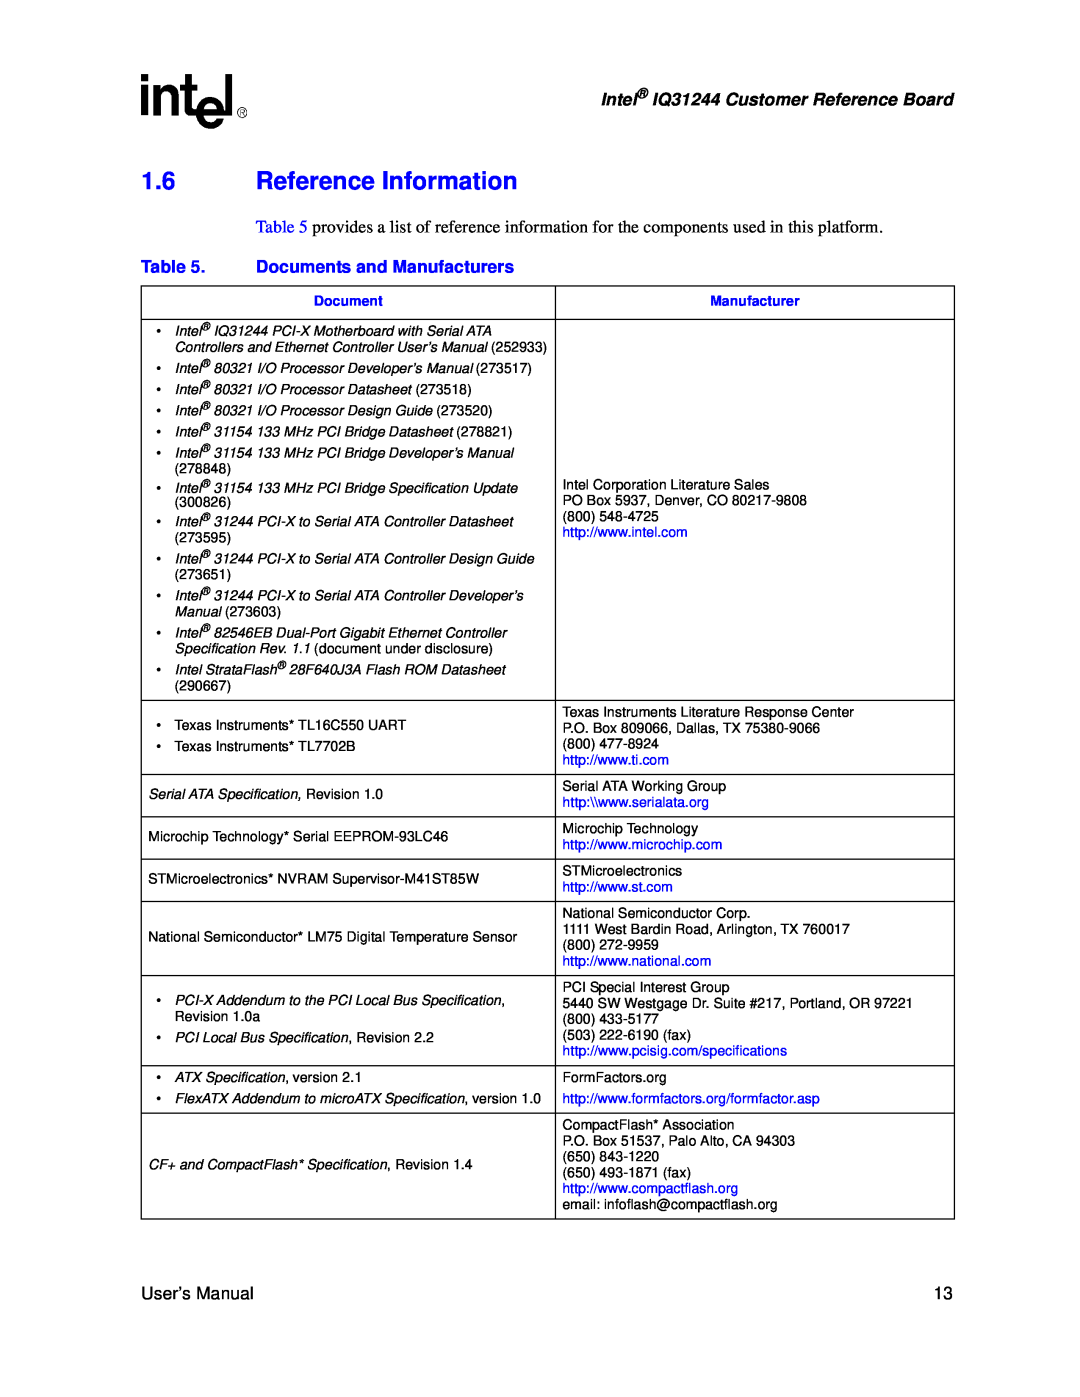 Intel user manual 1.6Reference Information, Documents and Manufacturers, Intel IQ31244 Customer Reference Board 